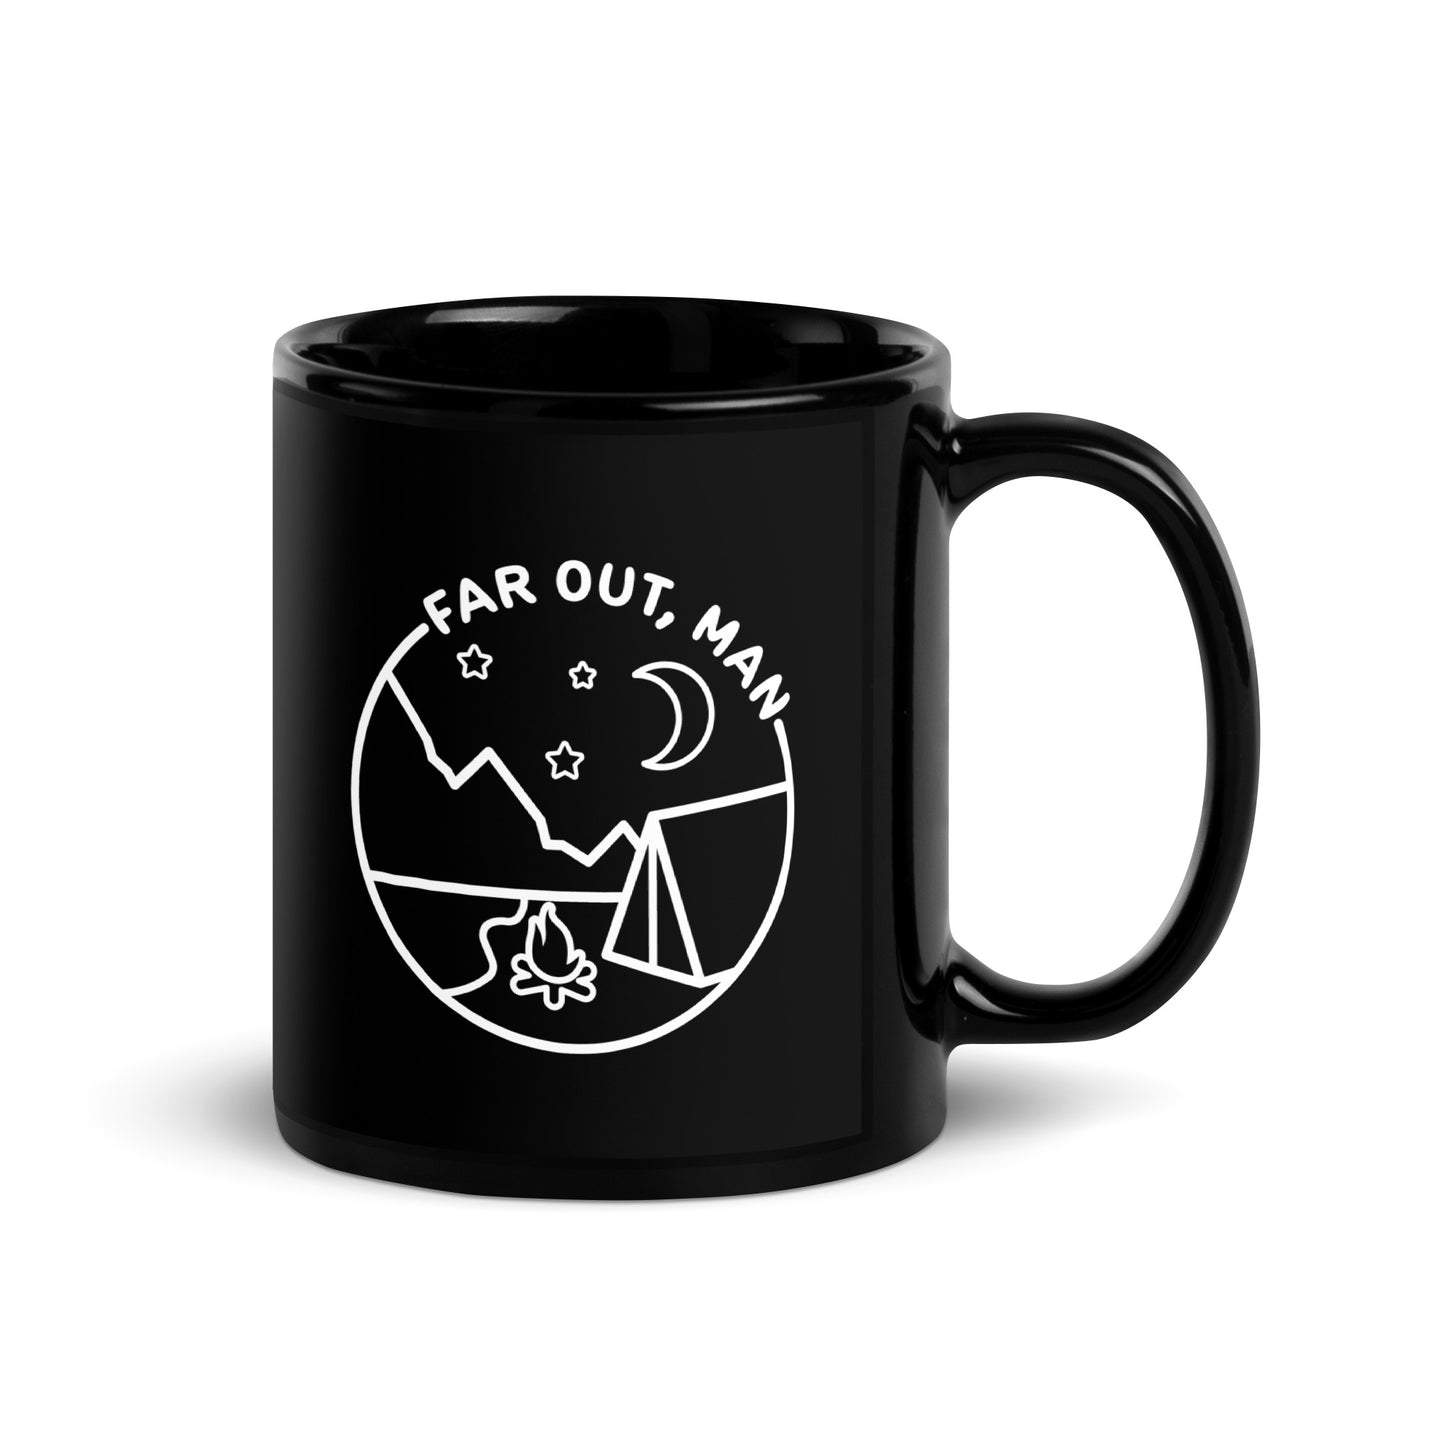 A black ceramic 11 ounce coffee mug with a white lineart illustration of a campfire and tent under a night sky. Text in an arc above the graphic reads "Far out, man"